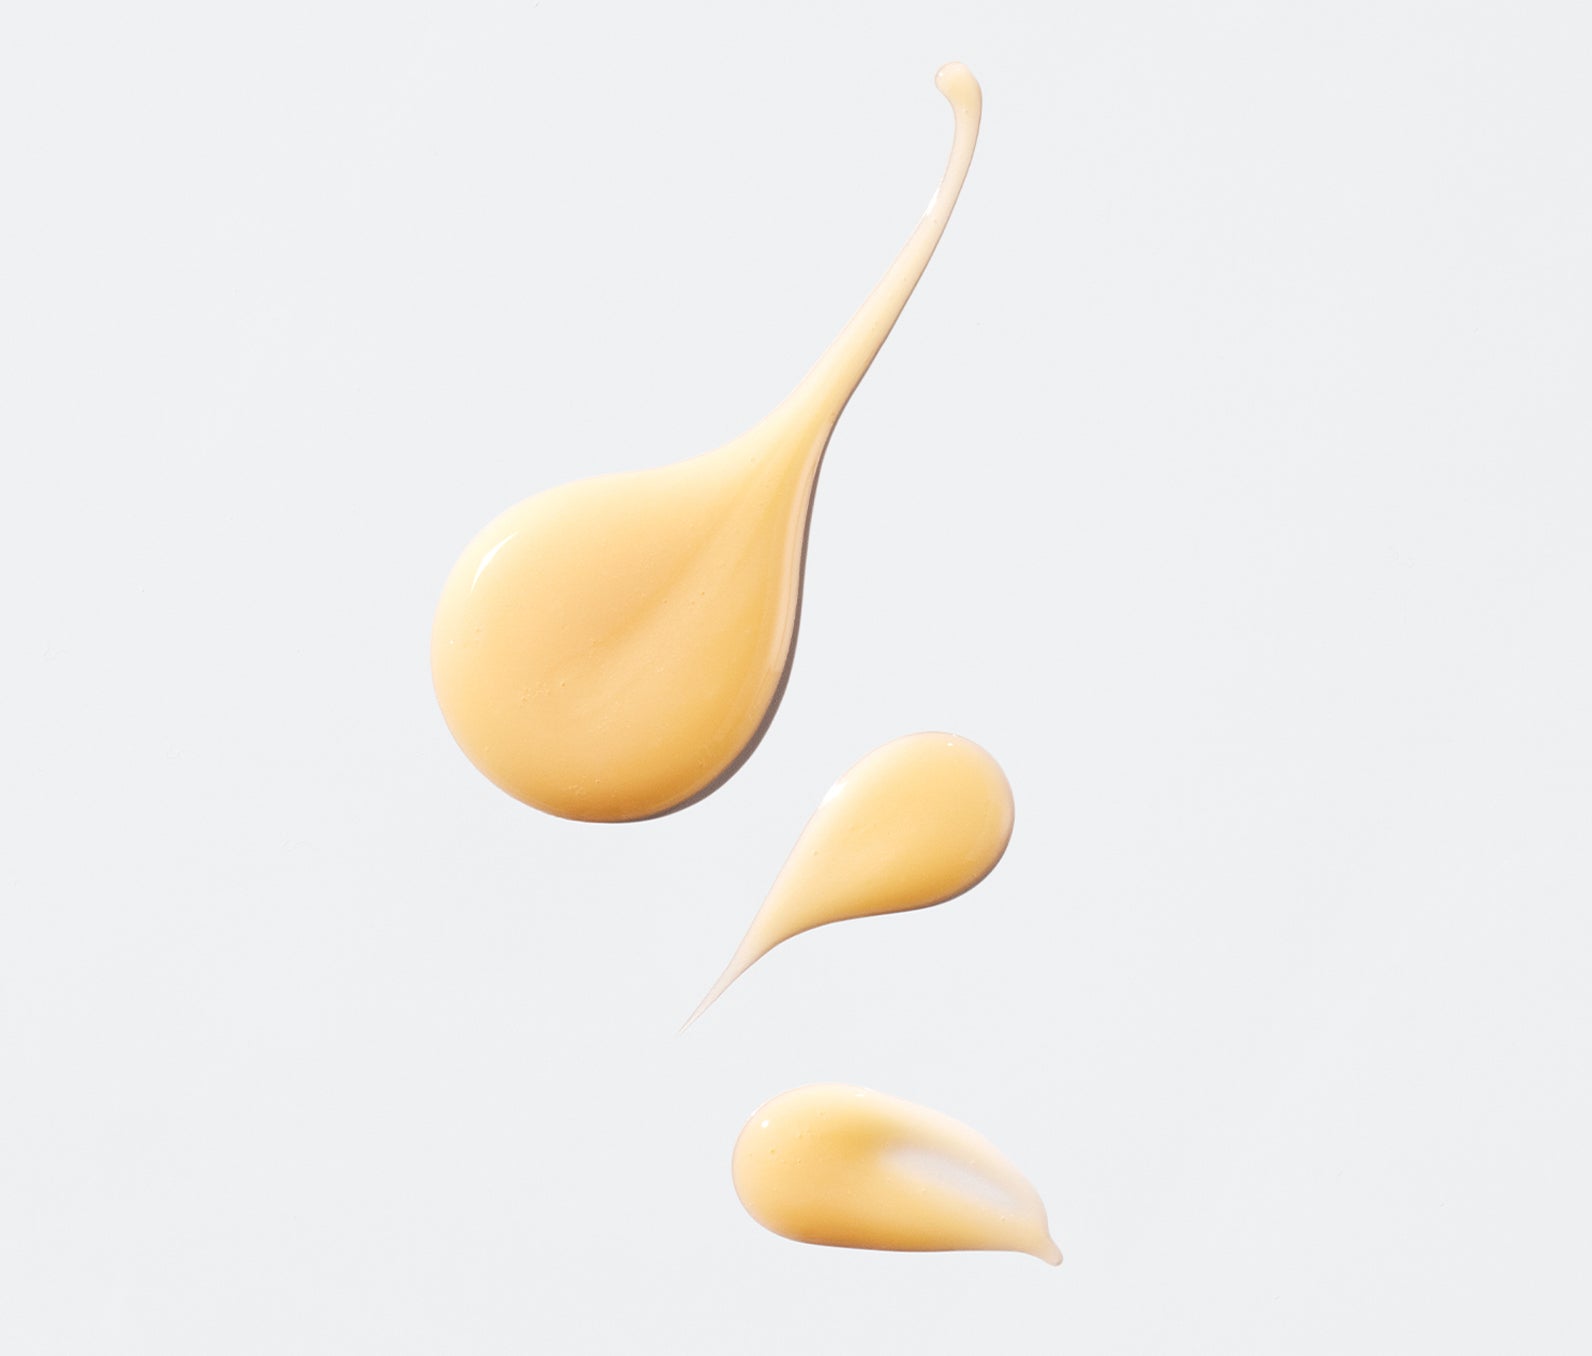 Drops and smears of Brighten Up Vitamin C Serum